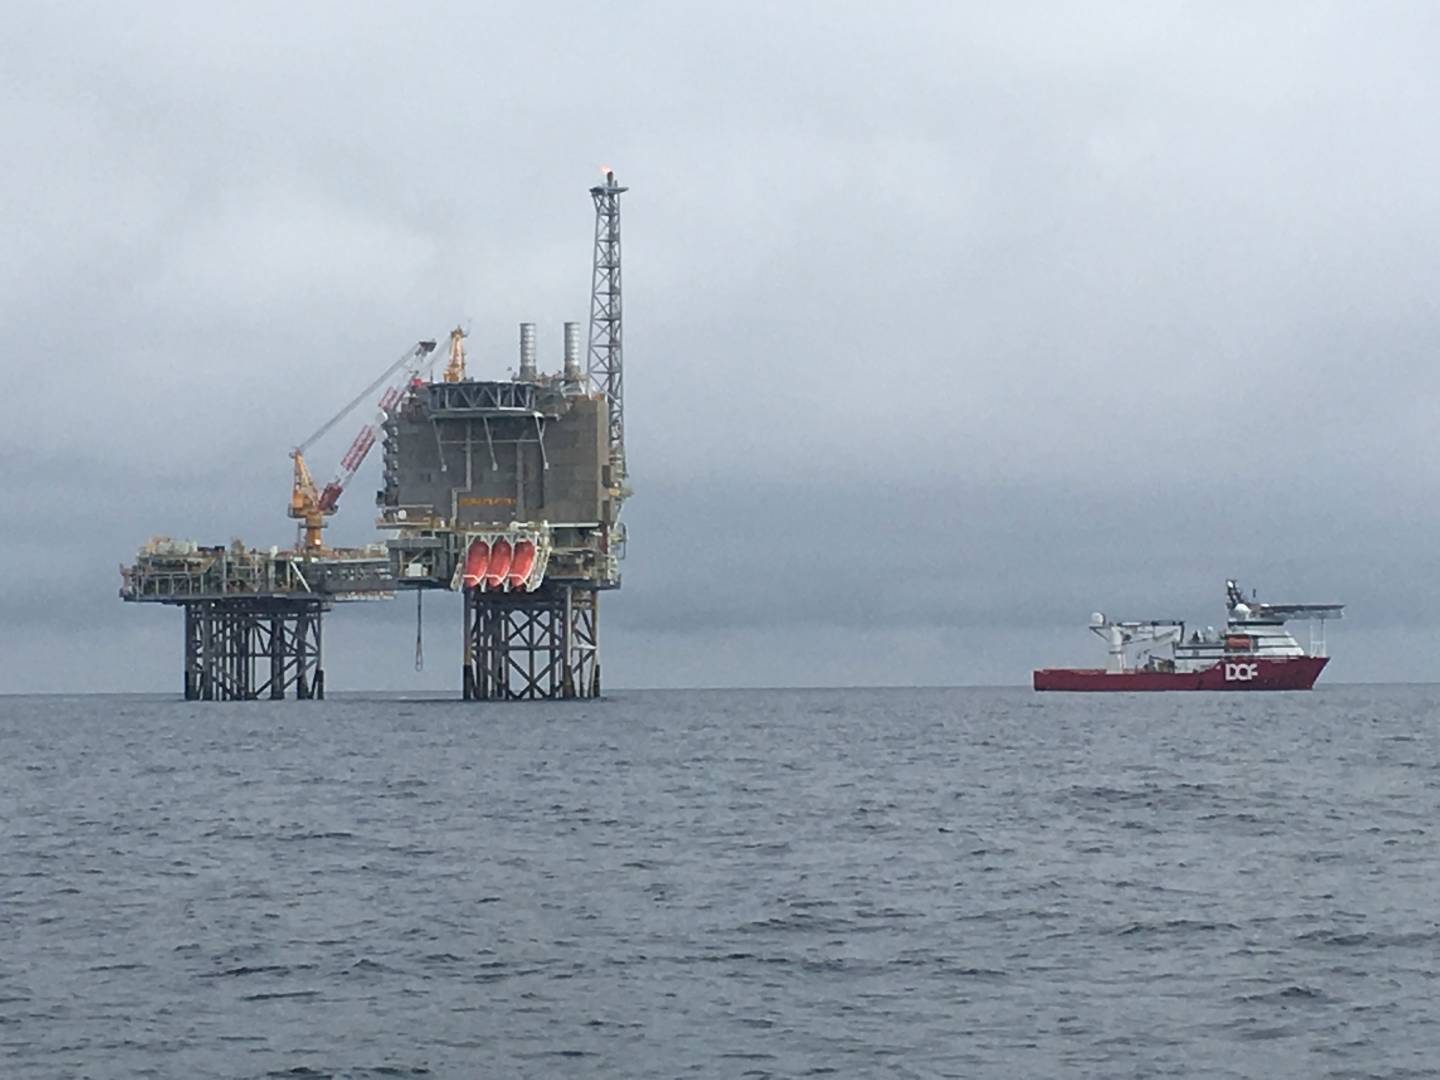 Offshore Oil and Gas Rigs Leak More Greenhouse Gas than Expected